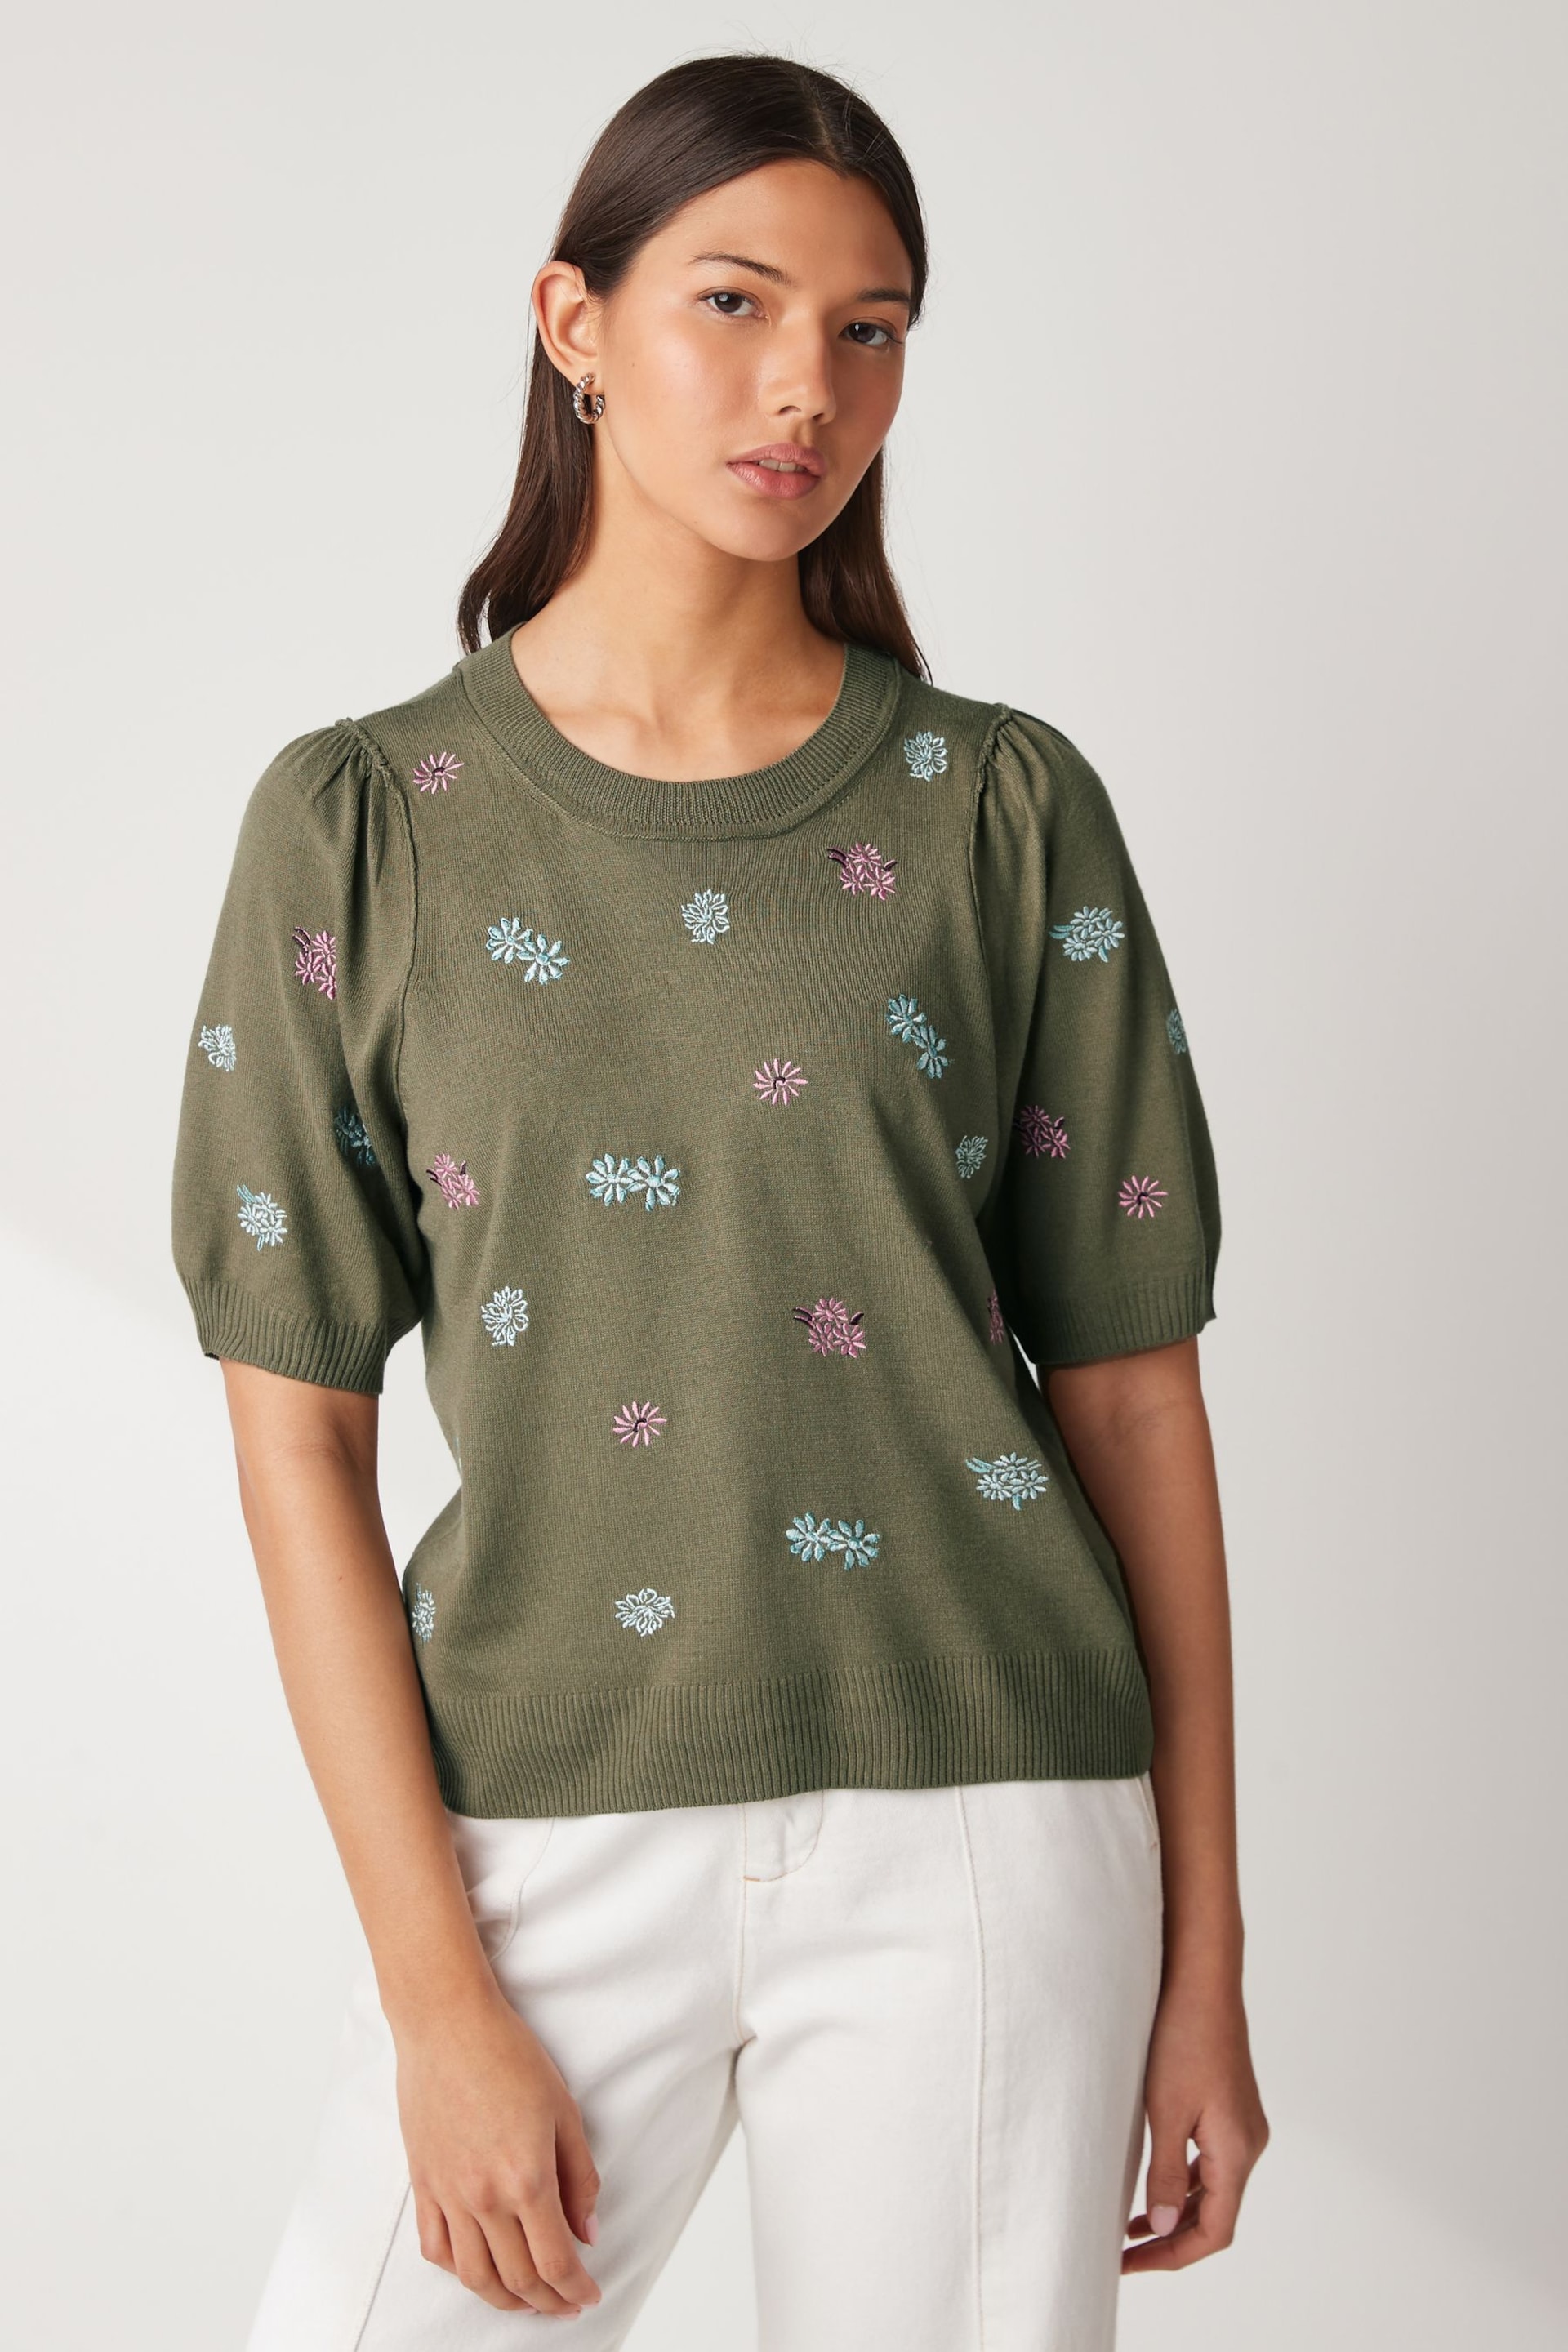 Khaki Green Floral Embroidery Printed Crew Neck Short Sleeve Knitted Top - Image 1 of 5